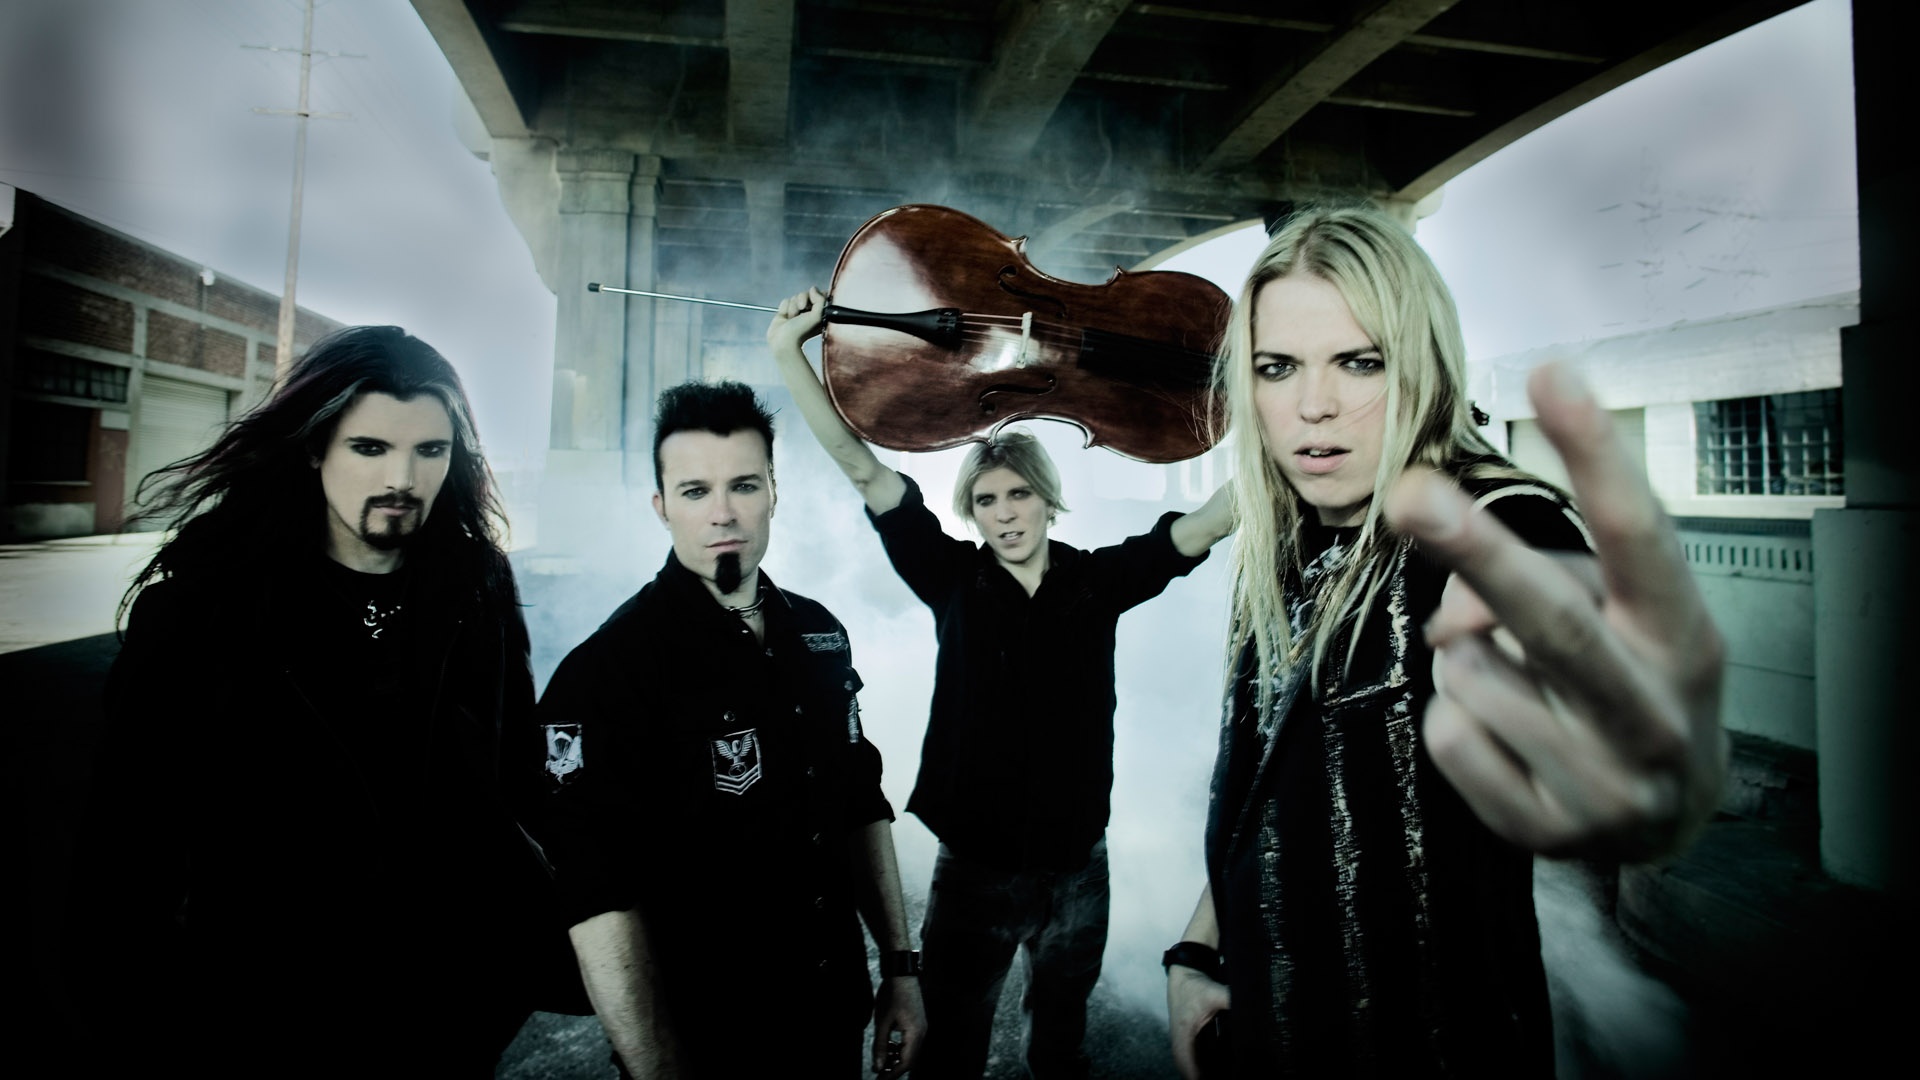 Nice Images Collection: Apocalyptica Desktop Wallpapers